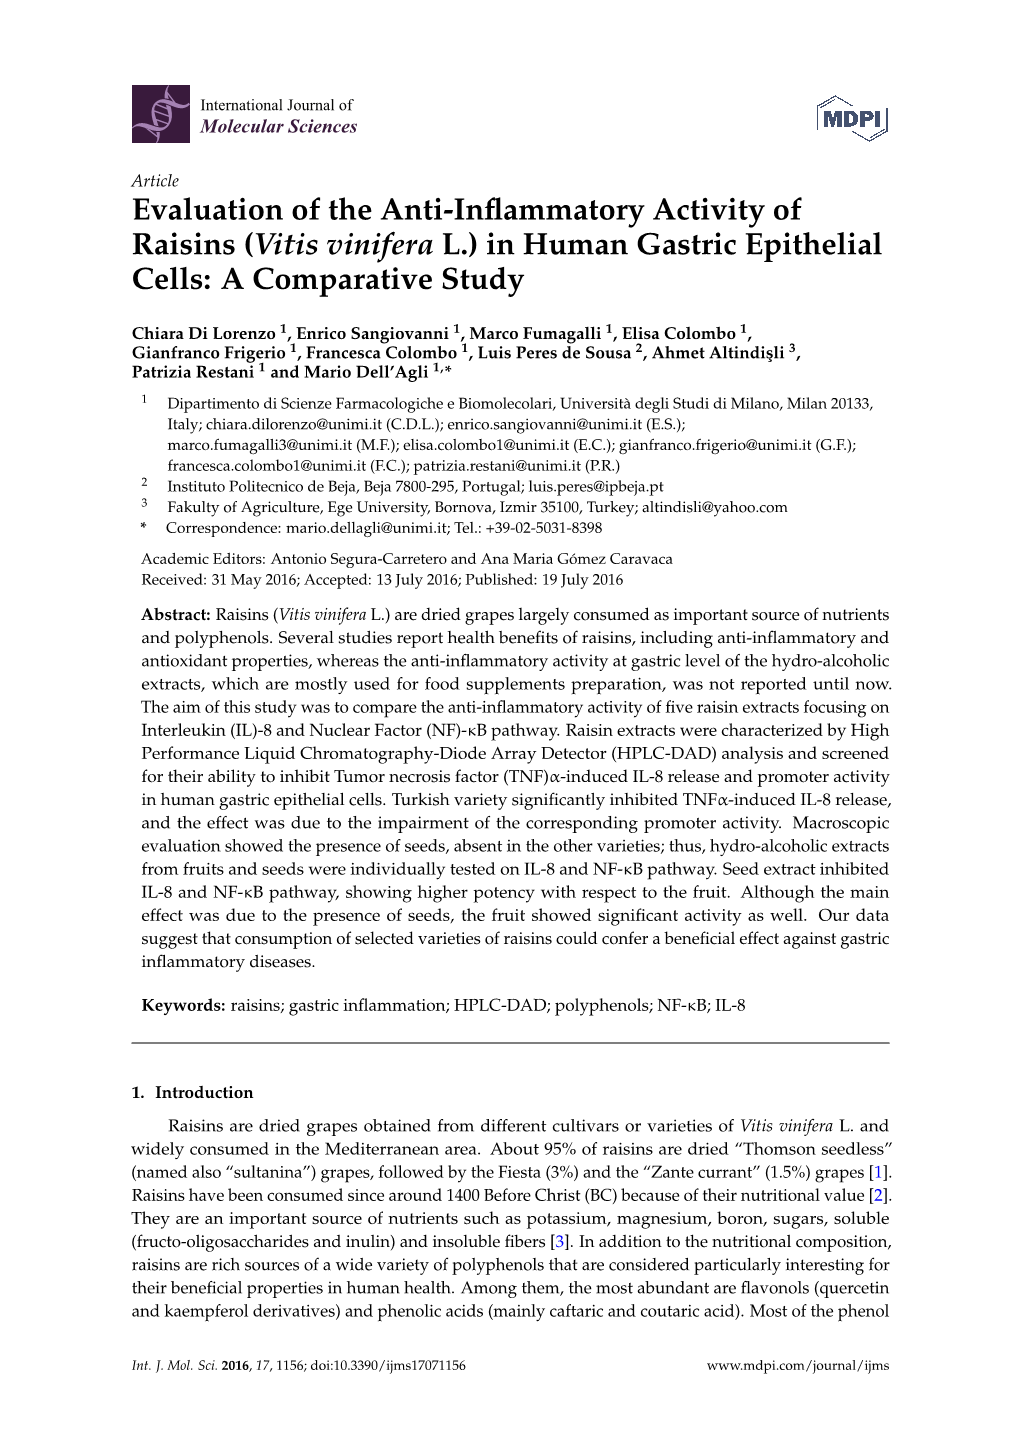 (Vitis Vinifera L.) in Human Gastric Epithelial Cells: a Comparative Study